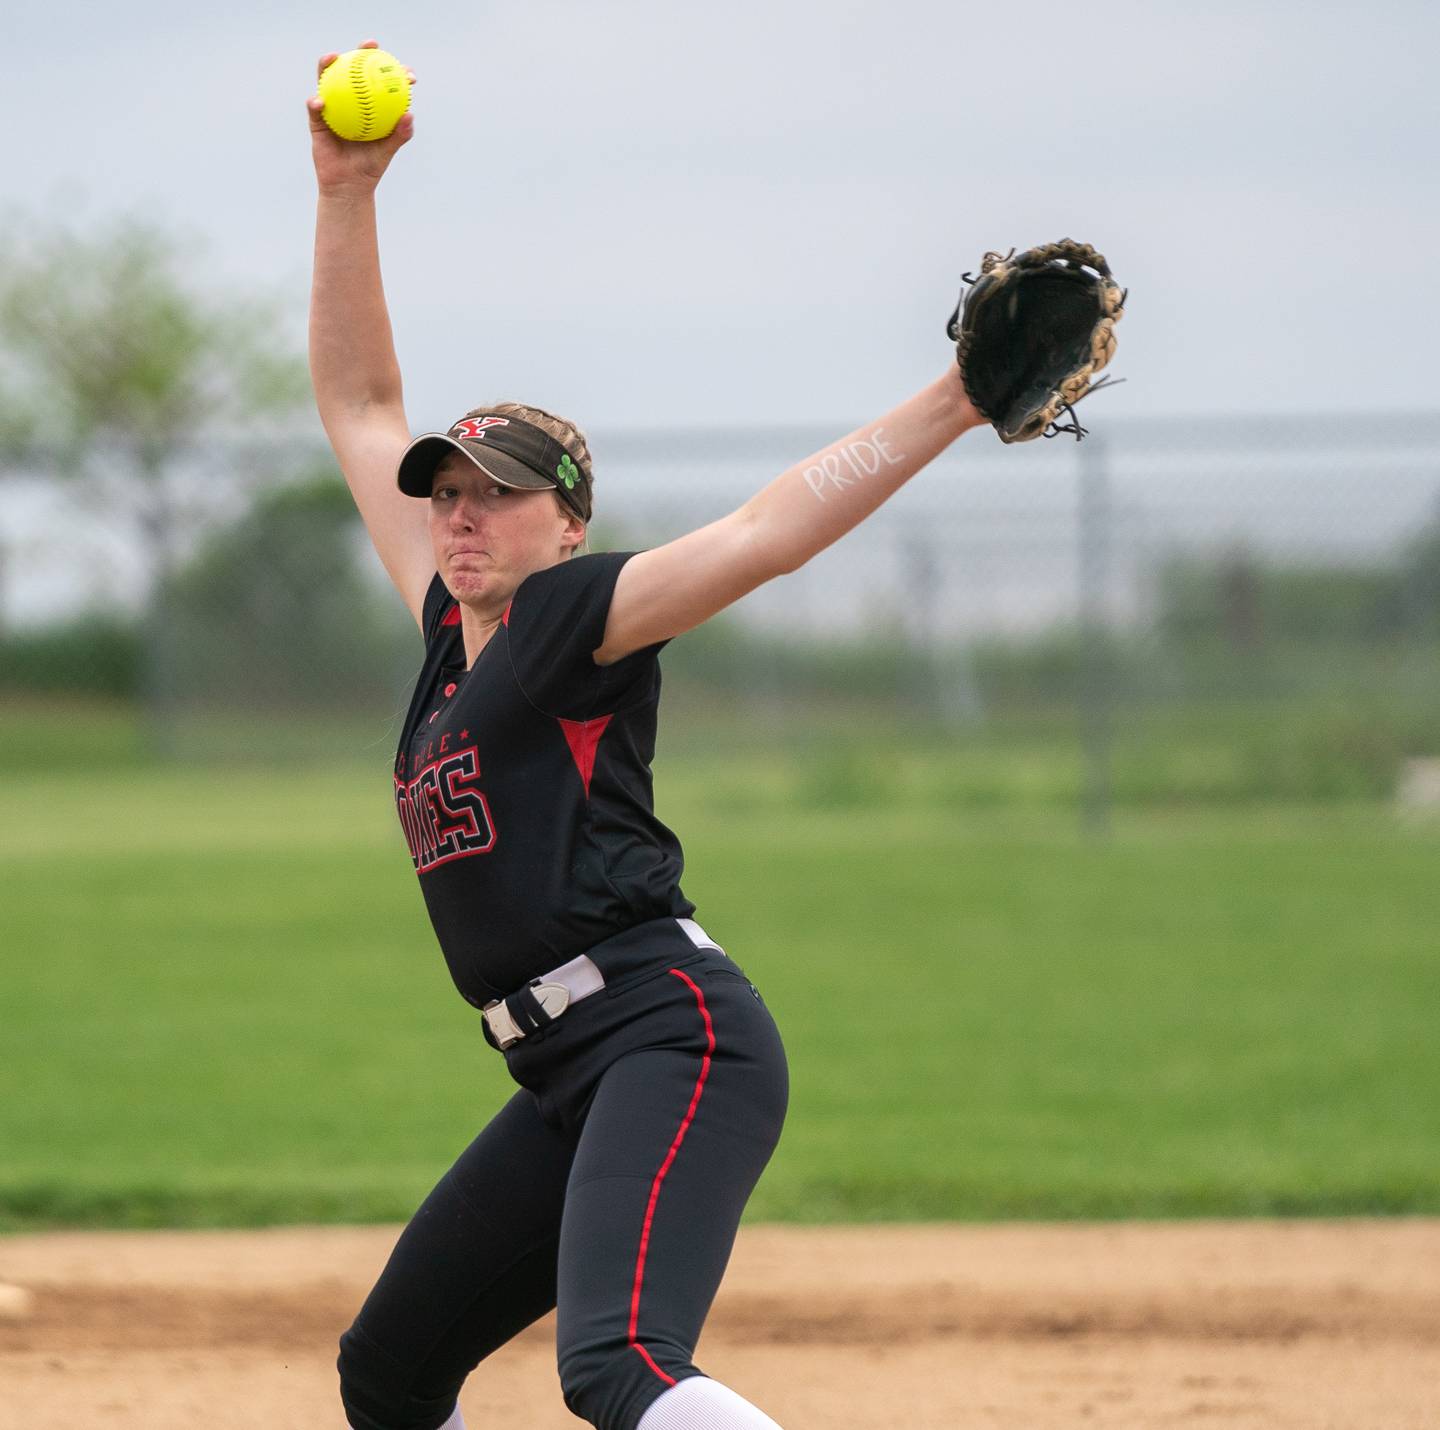 Yorkville's Madi Reeves (2) delivers a pitch against Plainfield North during the Class 4A Oswego East Regional softball final at Oswego East High School on Friday, May 27, 2022.